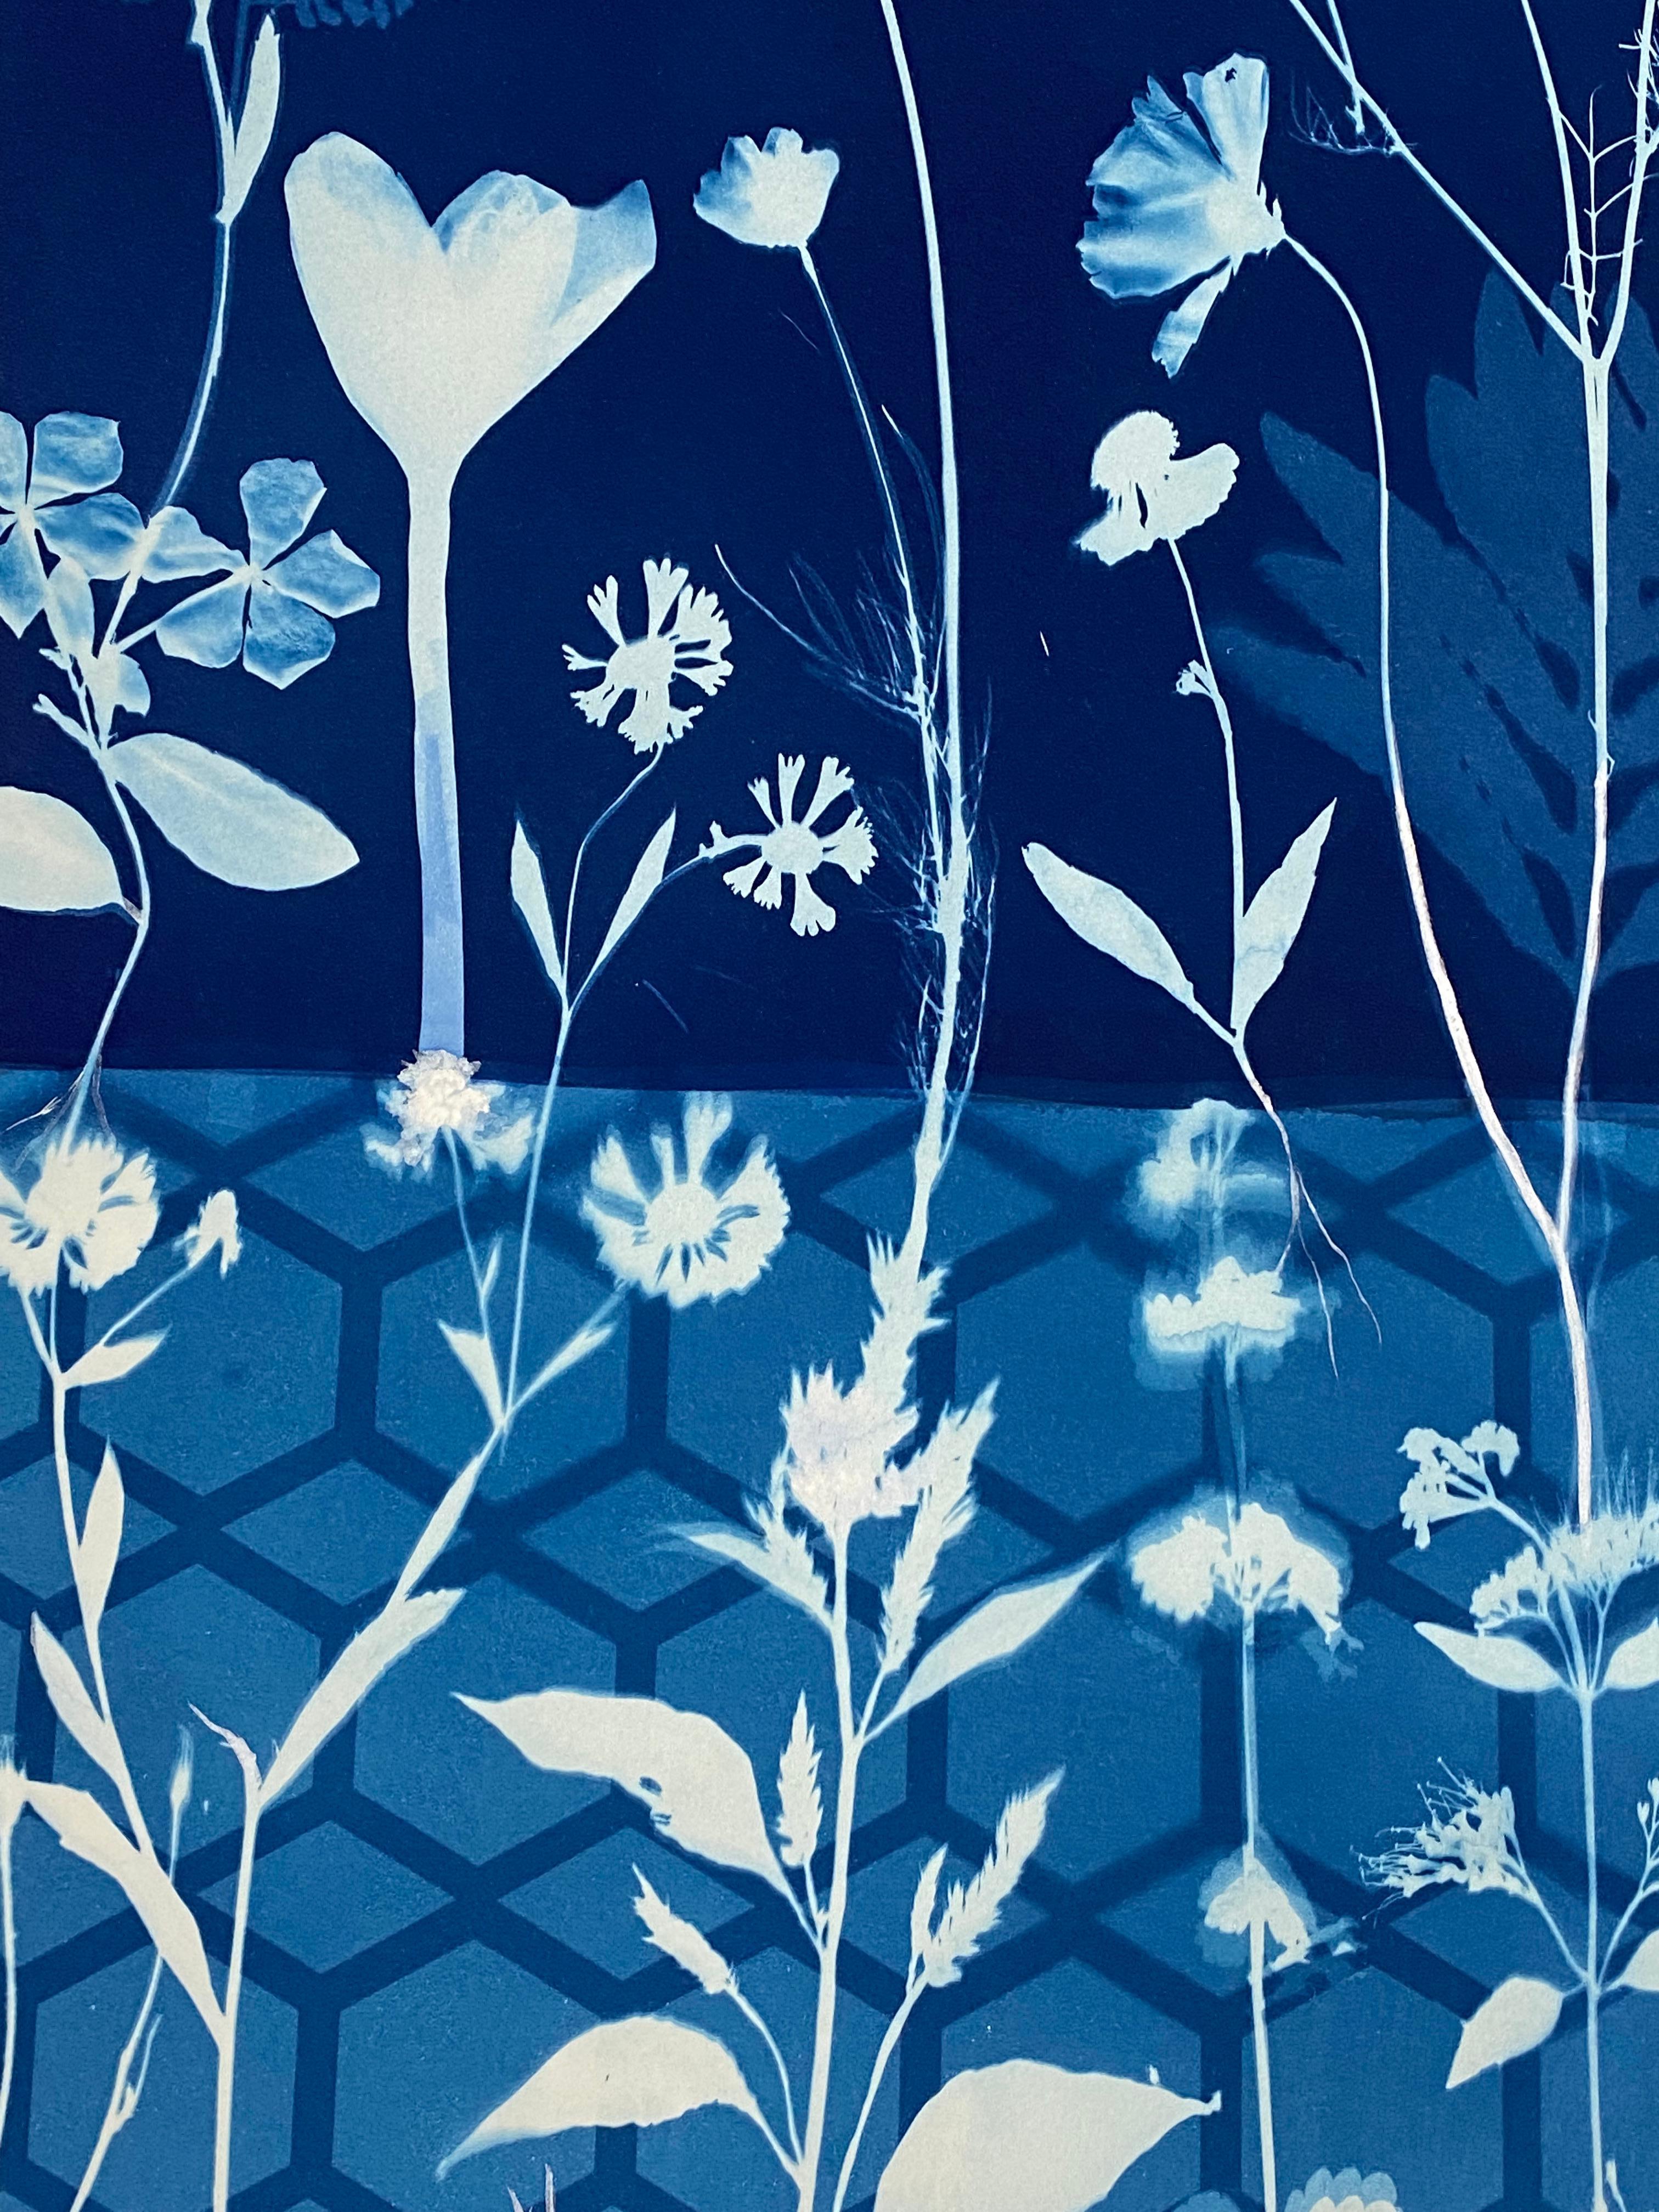 Cyanotype Painting Crocus, Star Flower, Cosmos, Ferns, Botanical Painting, Blue For Sale 5